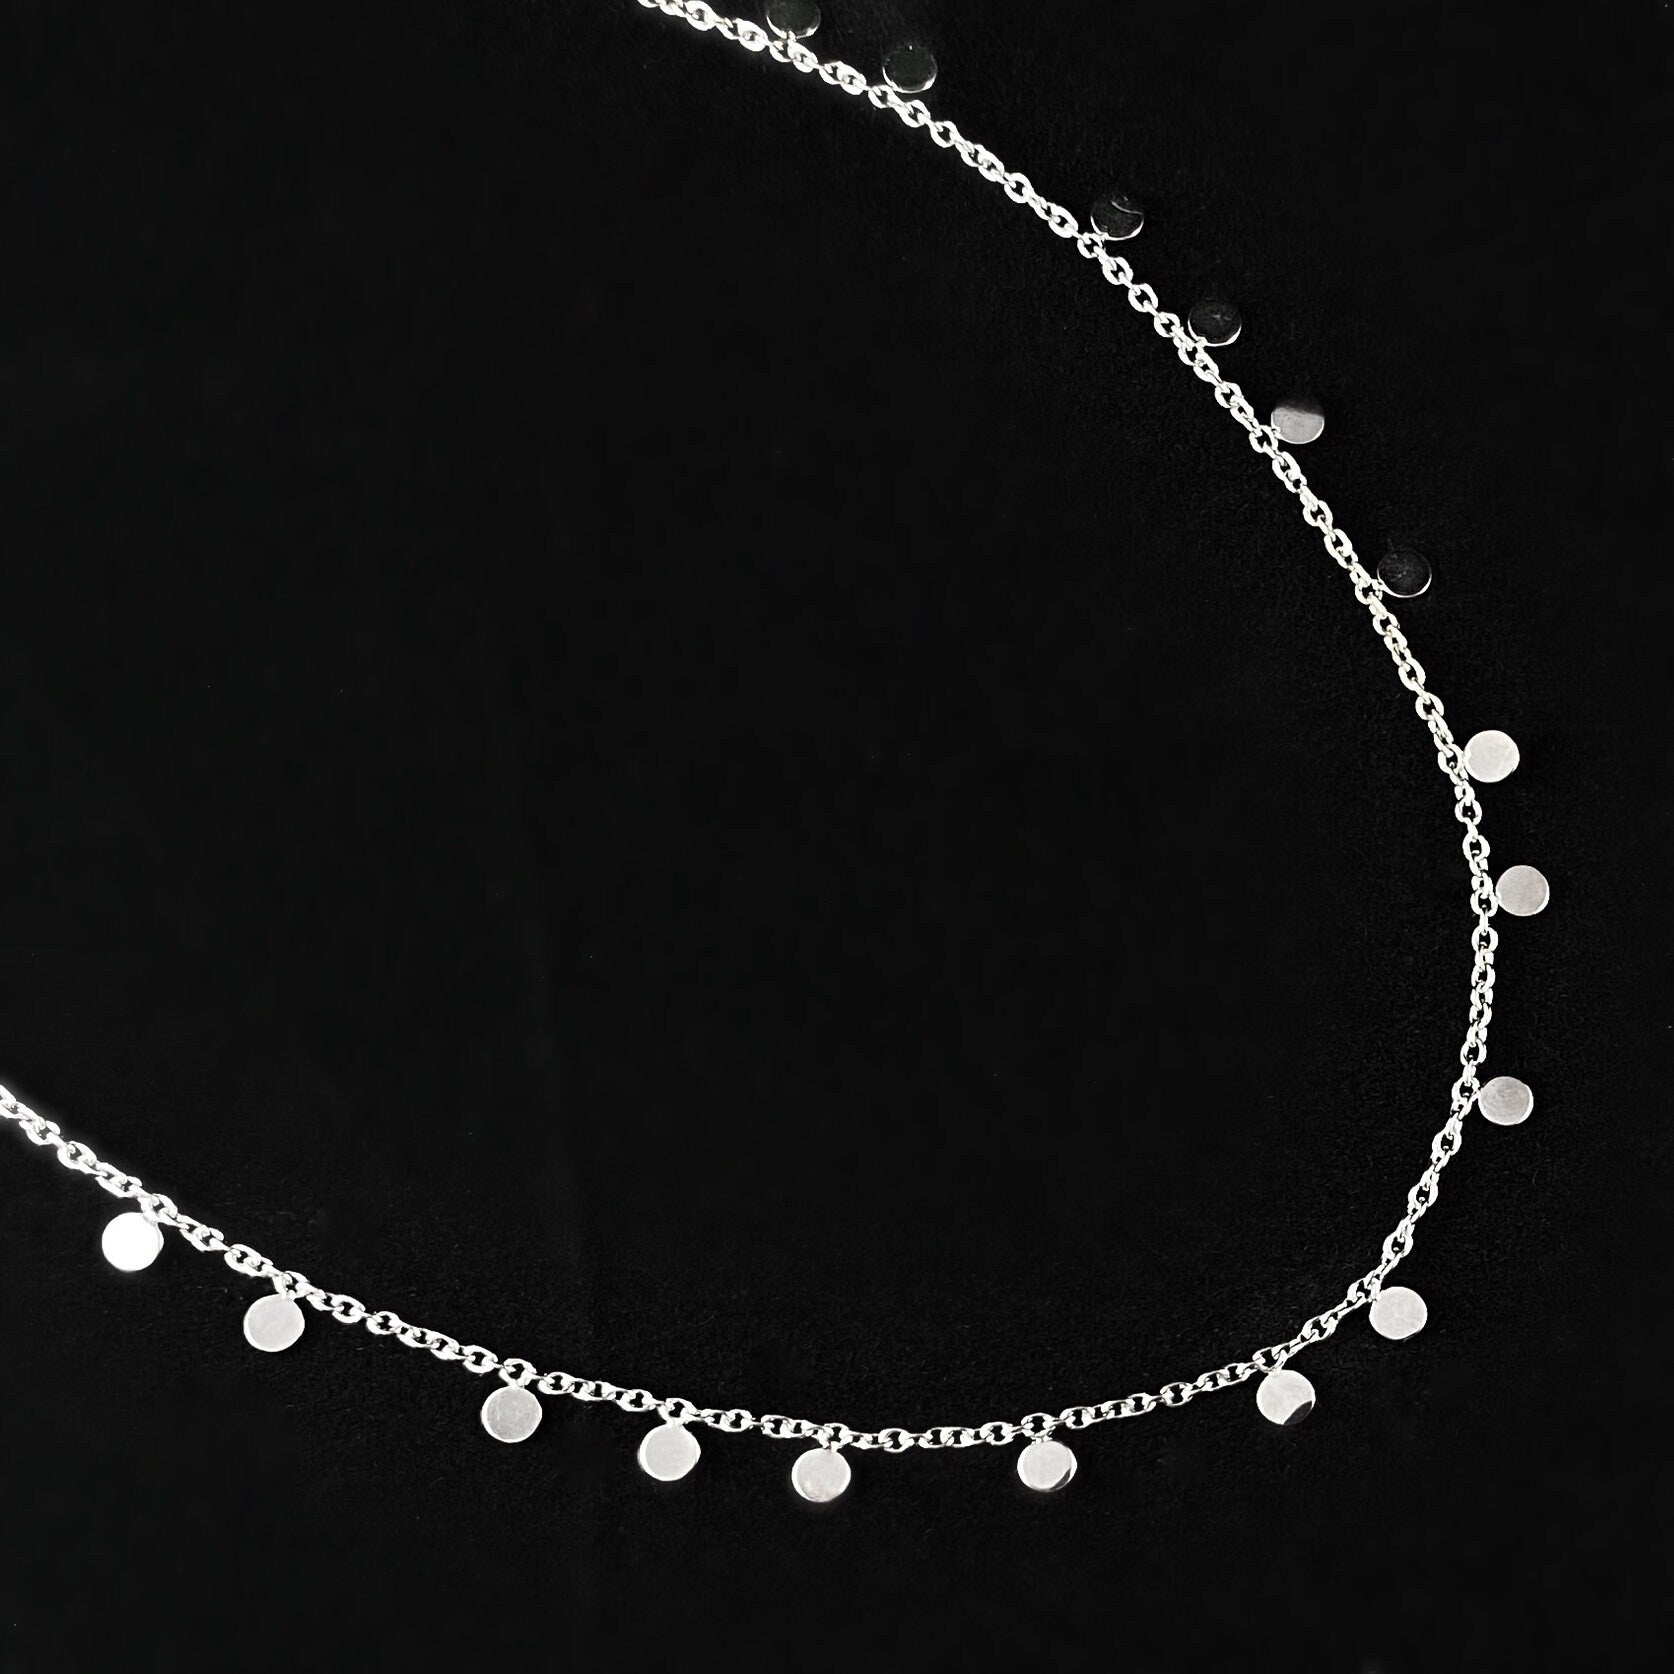 Dainty Silver Chain Necklace with Small Circle Pendants - Sabrina